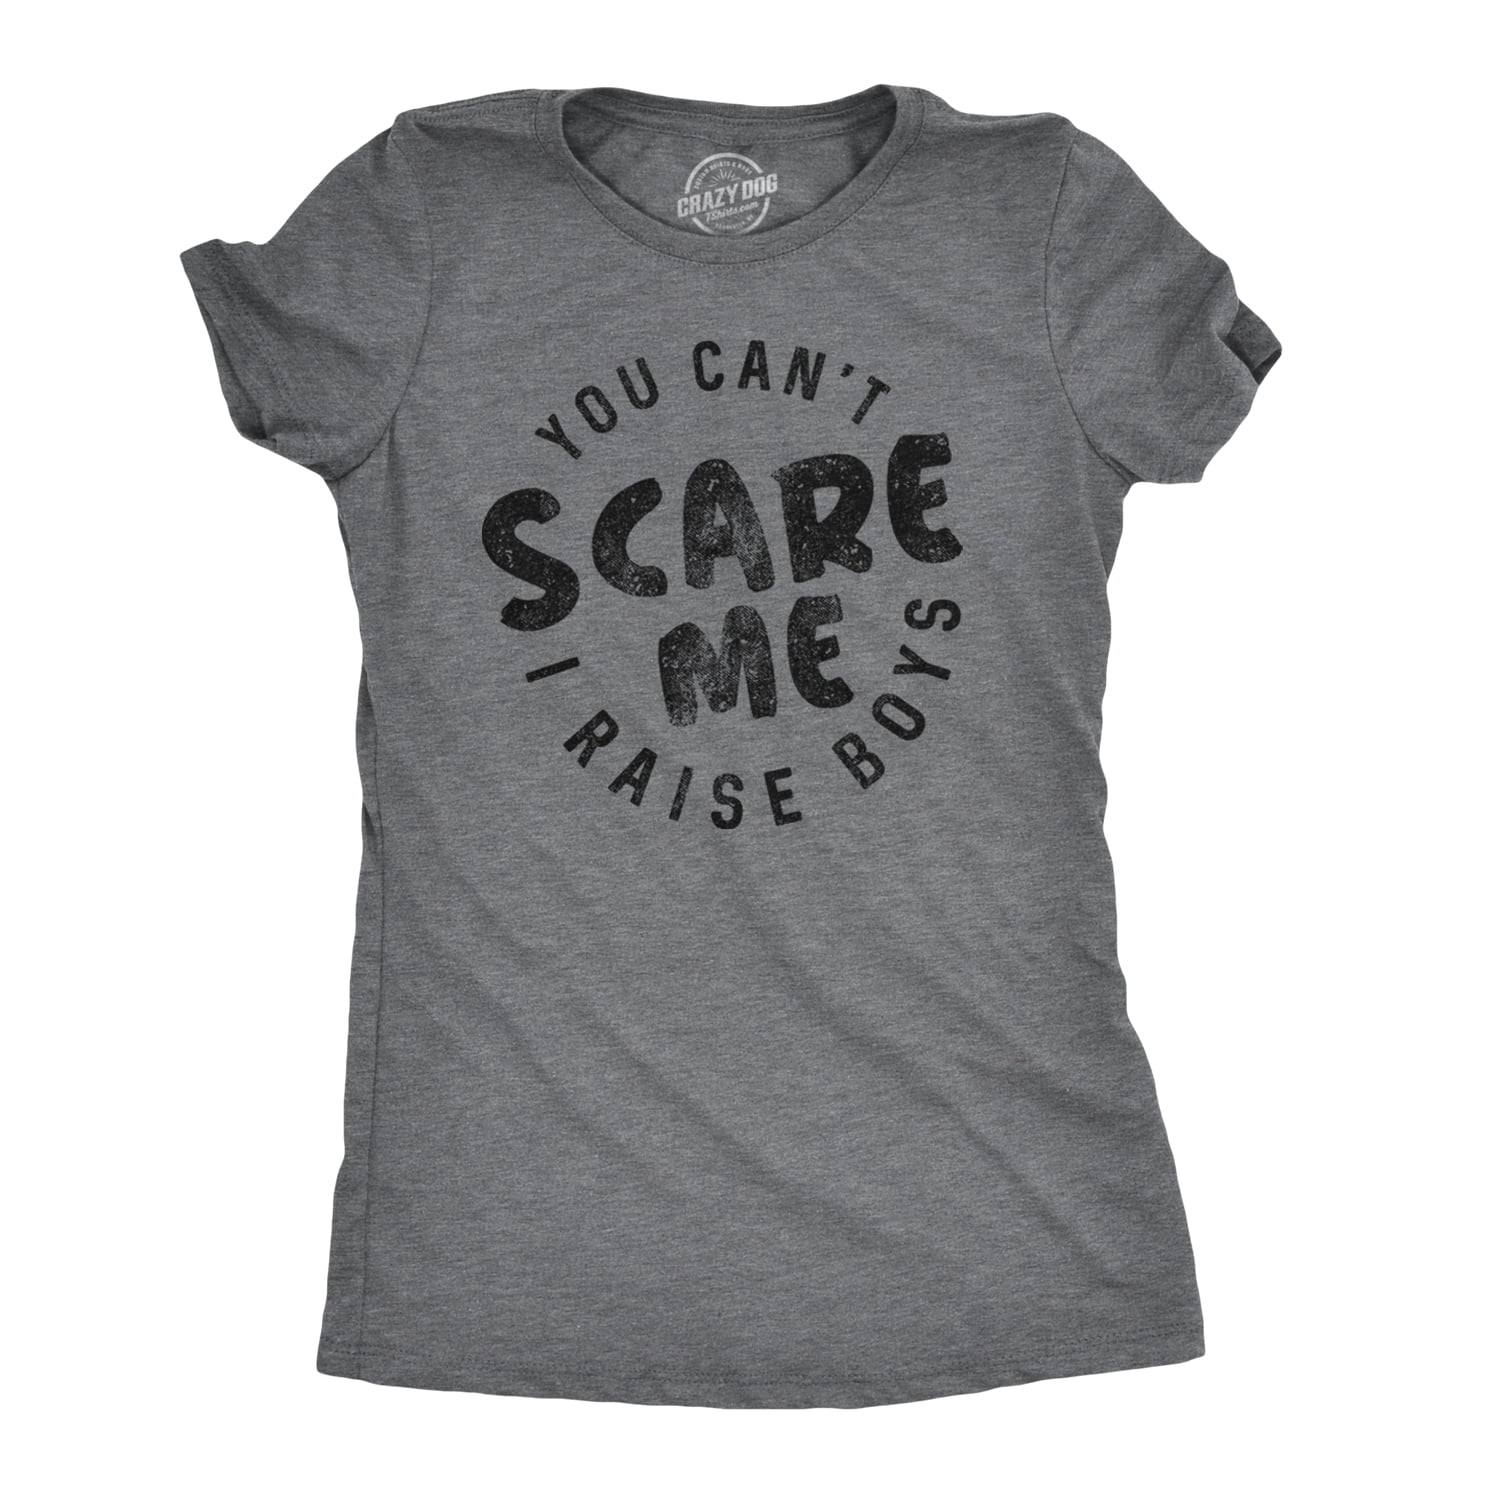 Womens You Cant Scare Me I Raise Boys T shirt Funny Gift for Mom (Dark  Heather Grey) - XL | Walmart Canada